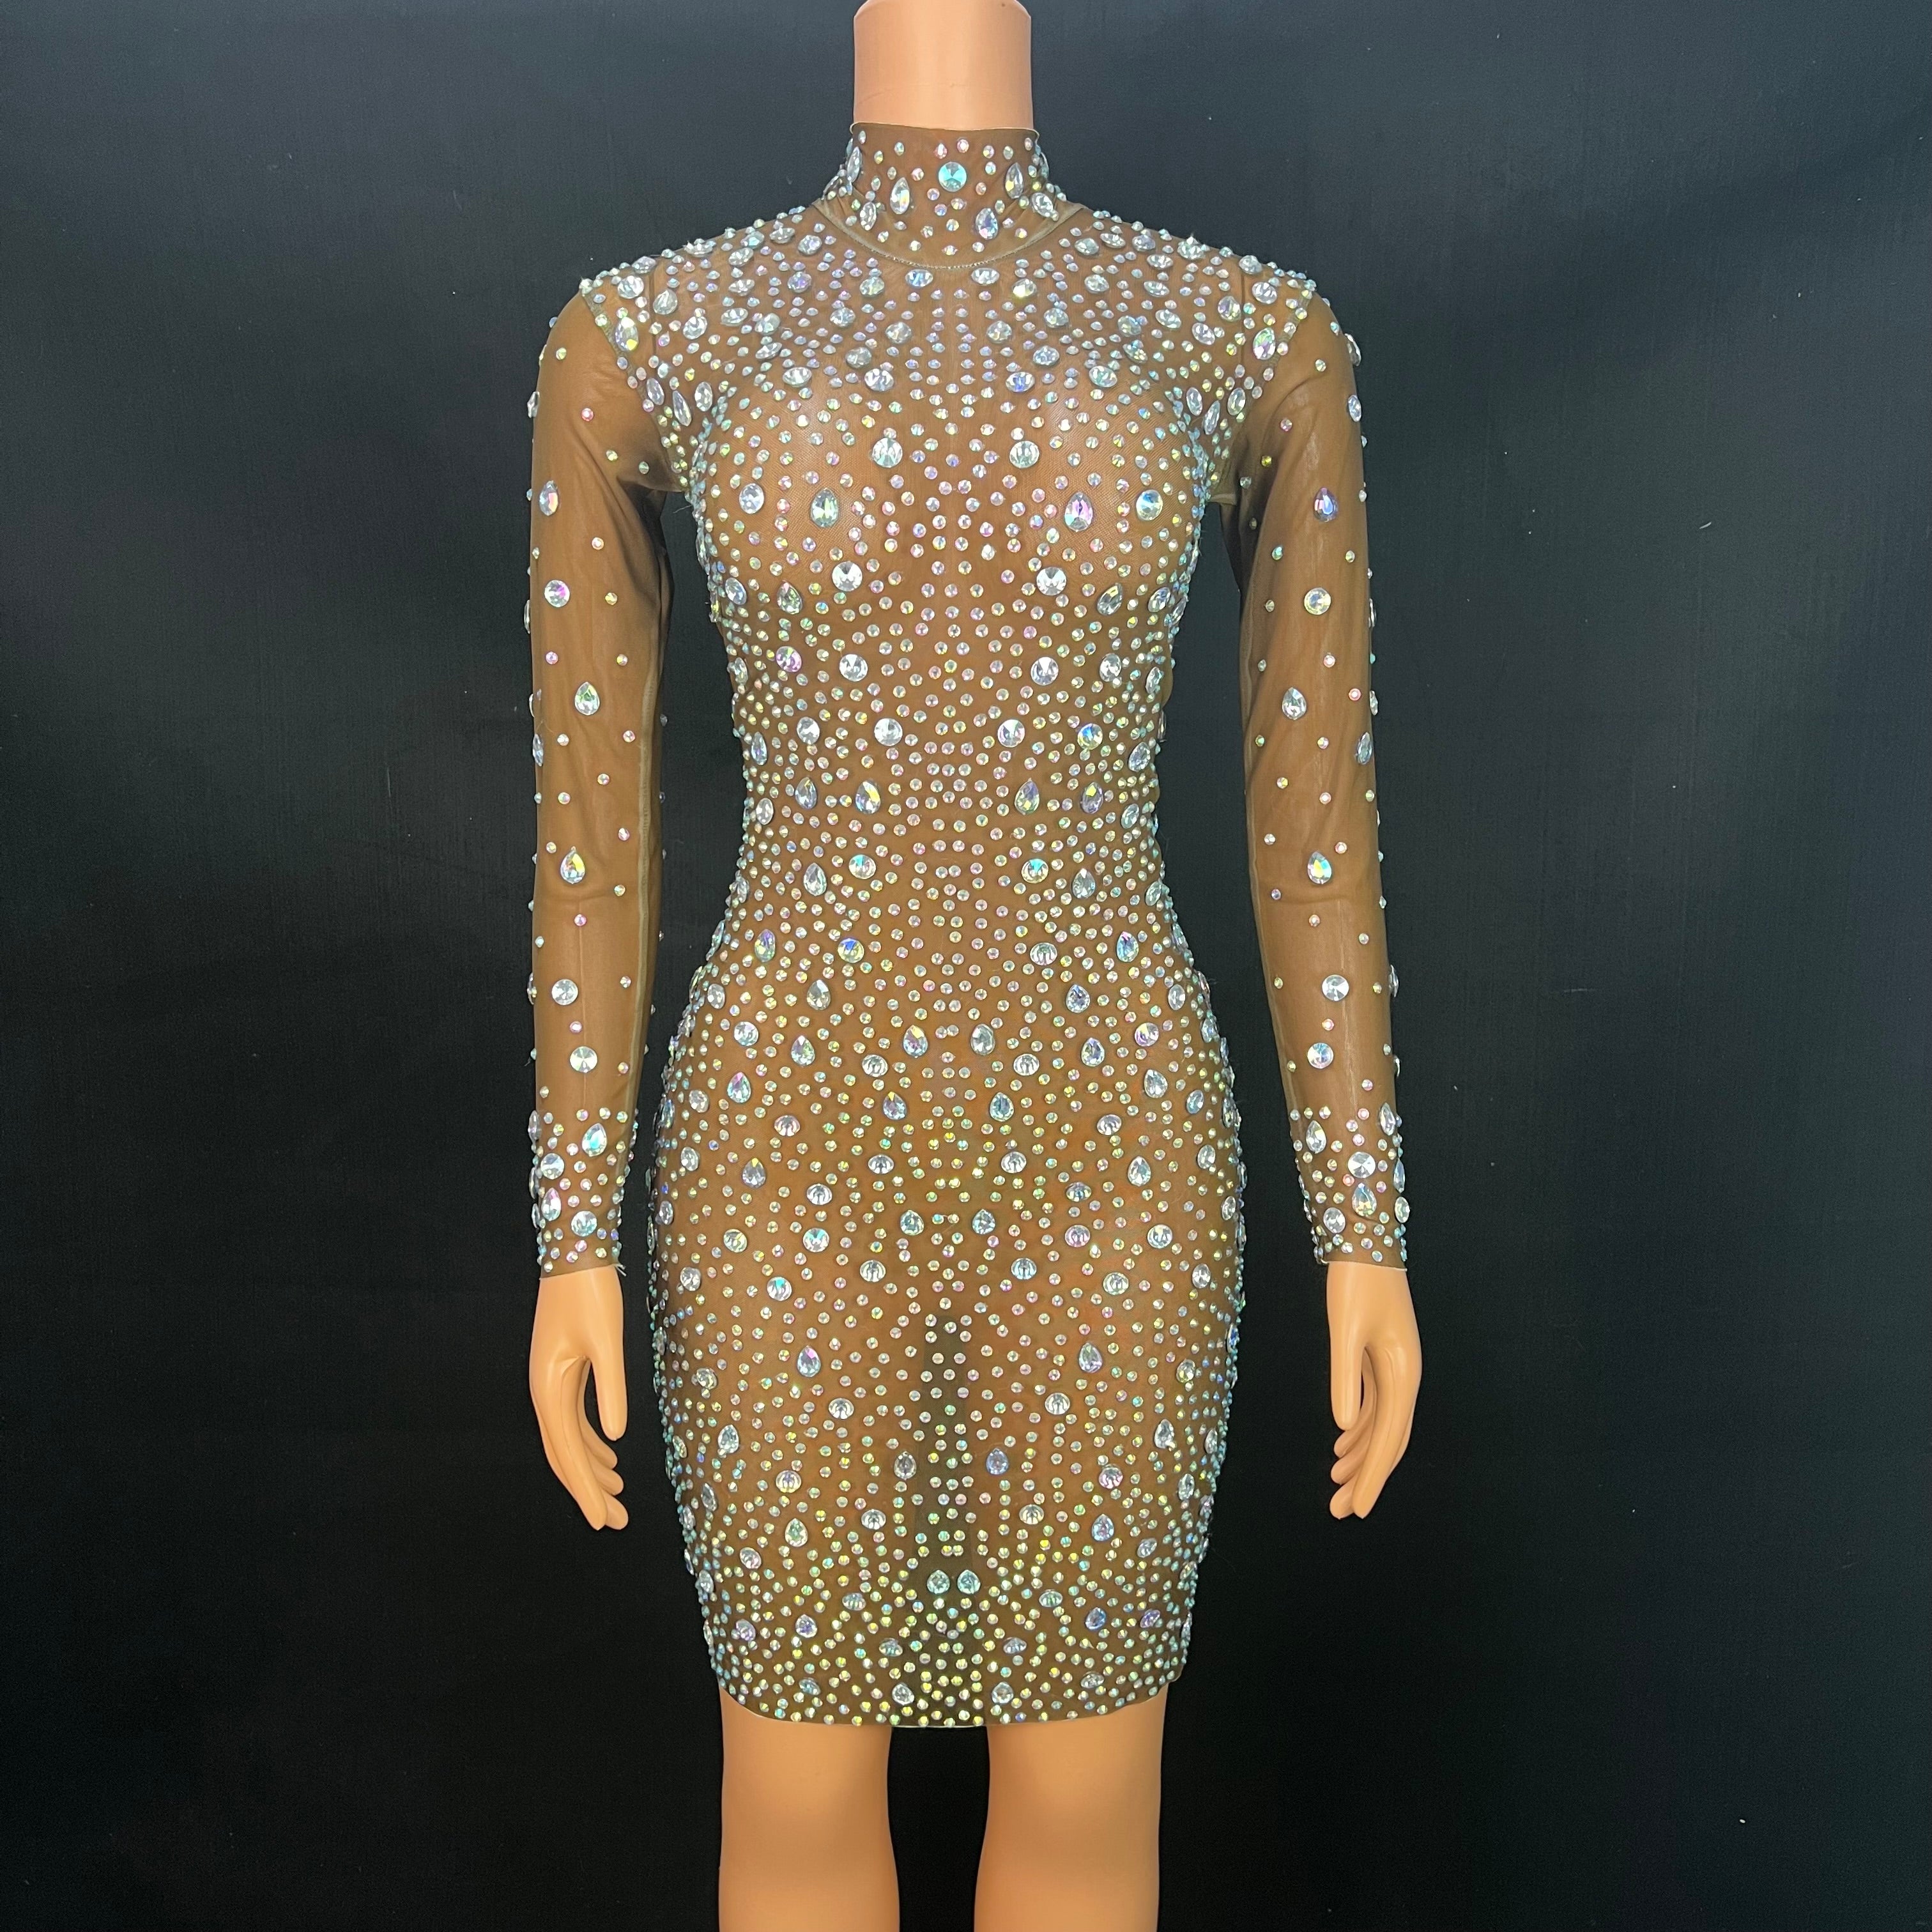 Shining Full AB Stones Brown Mesh Dress Evening Celebrate Show See Through Clothes Birthday Celebrate Performance Costume